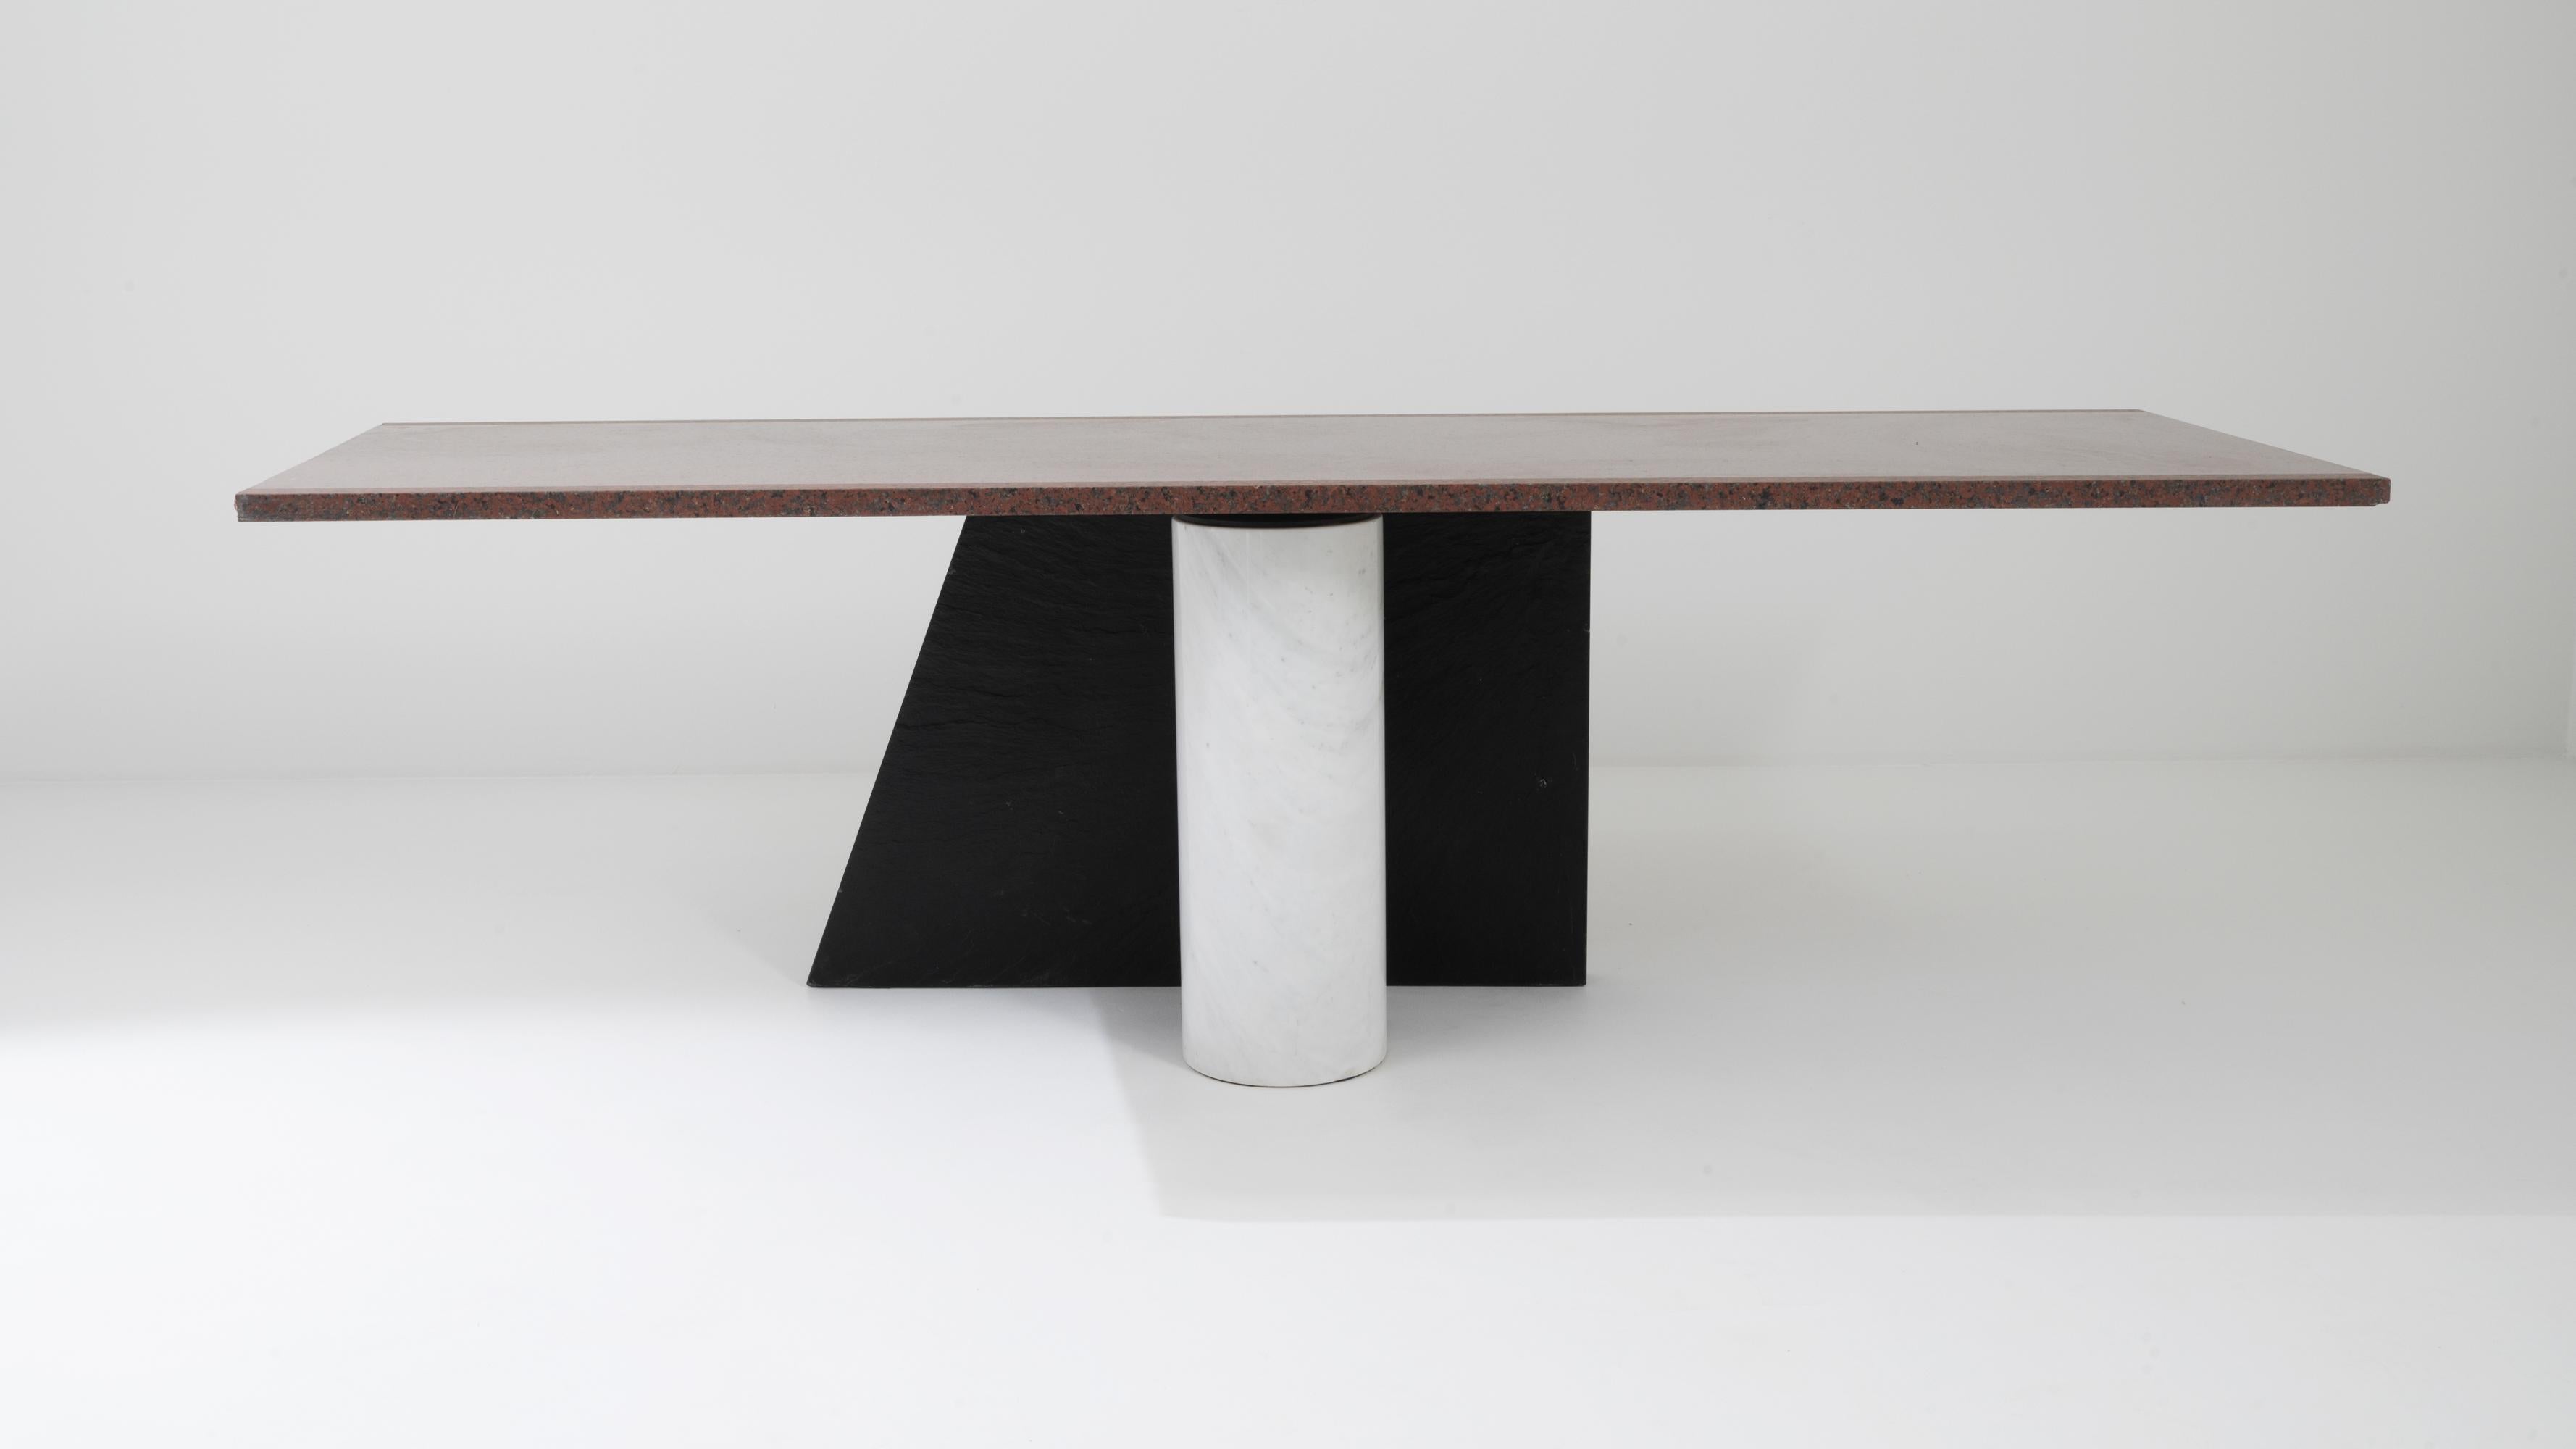 Abstract and experimental, this vintage marble table offers a compelling slice of design history. Made in Italy in the 20th century, the form reflects the bold geometric tendencies of the avant garde Bel Design movement. The table is composed of